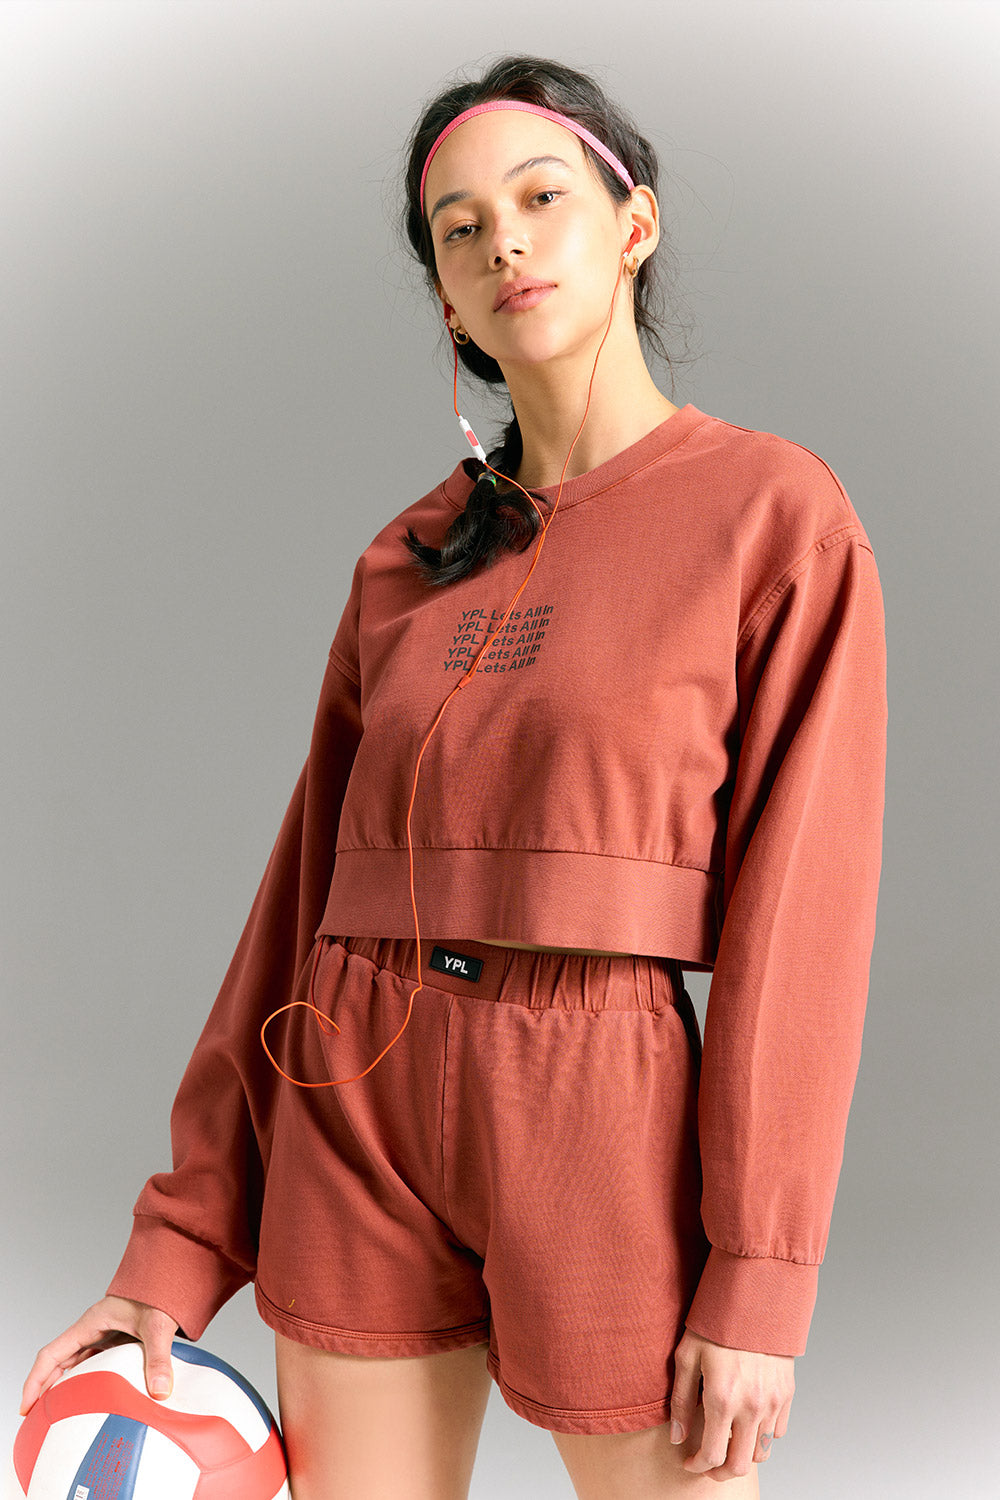 YPL Washed Pullover